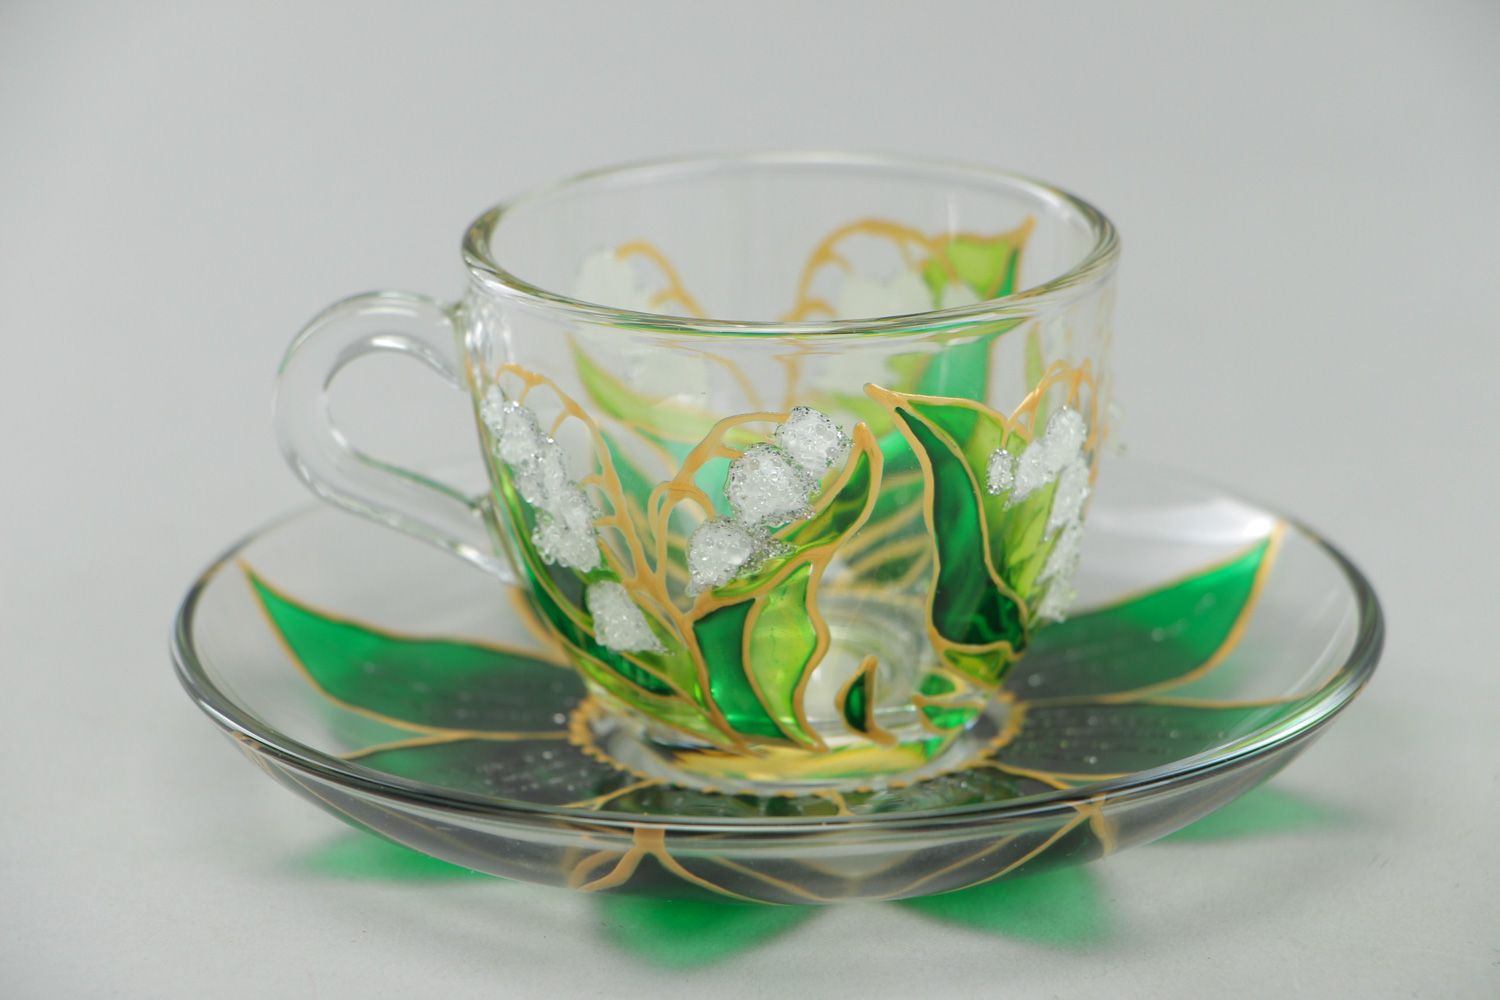 Unique clear glass teacup with hand-painted gold and green floral pattern photo 1